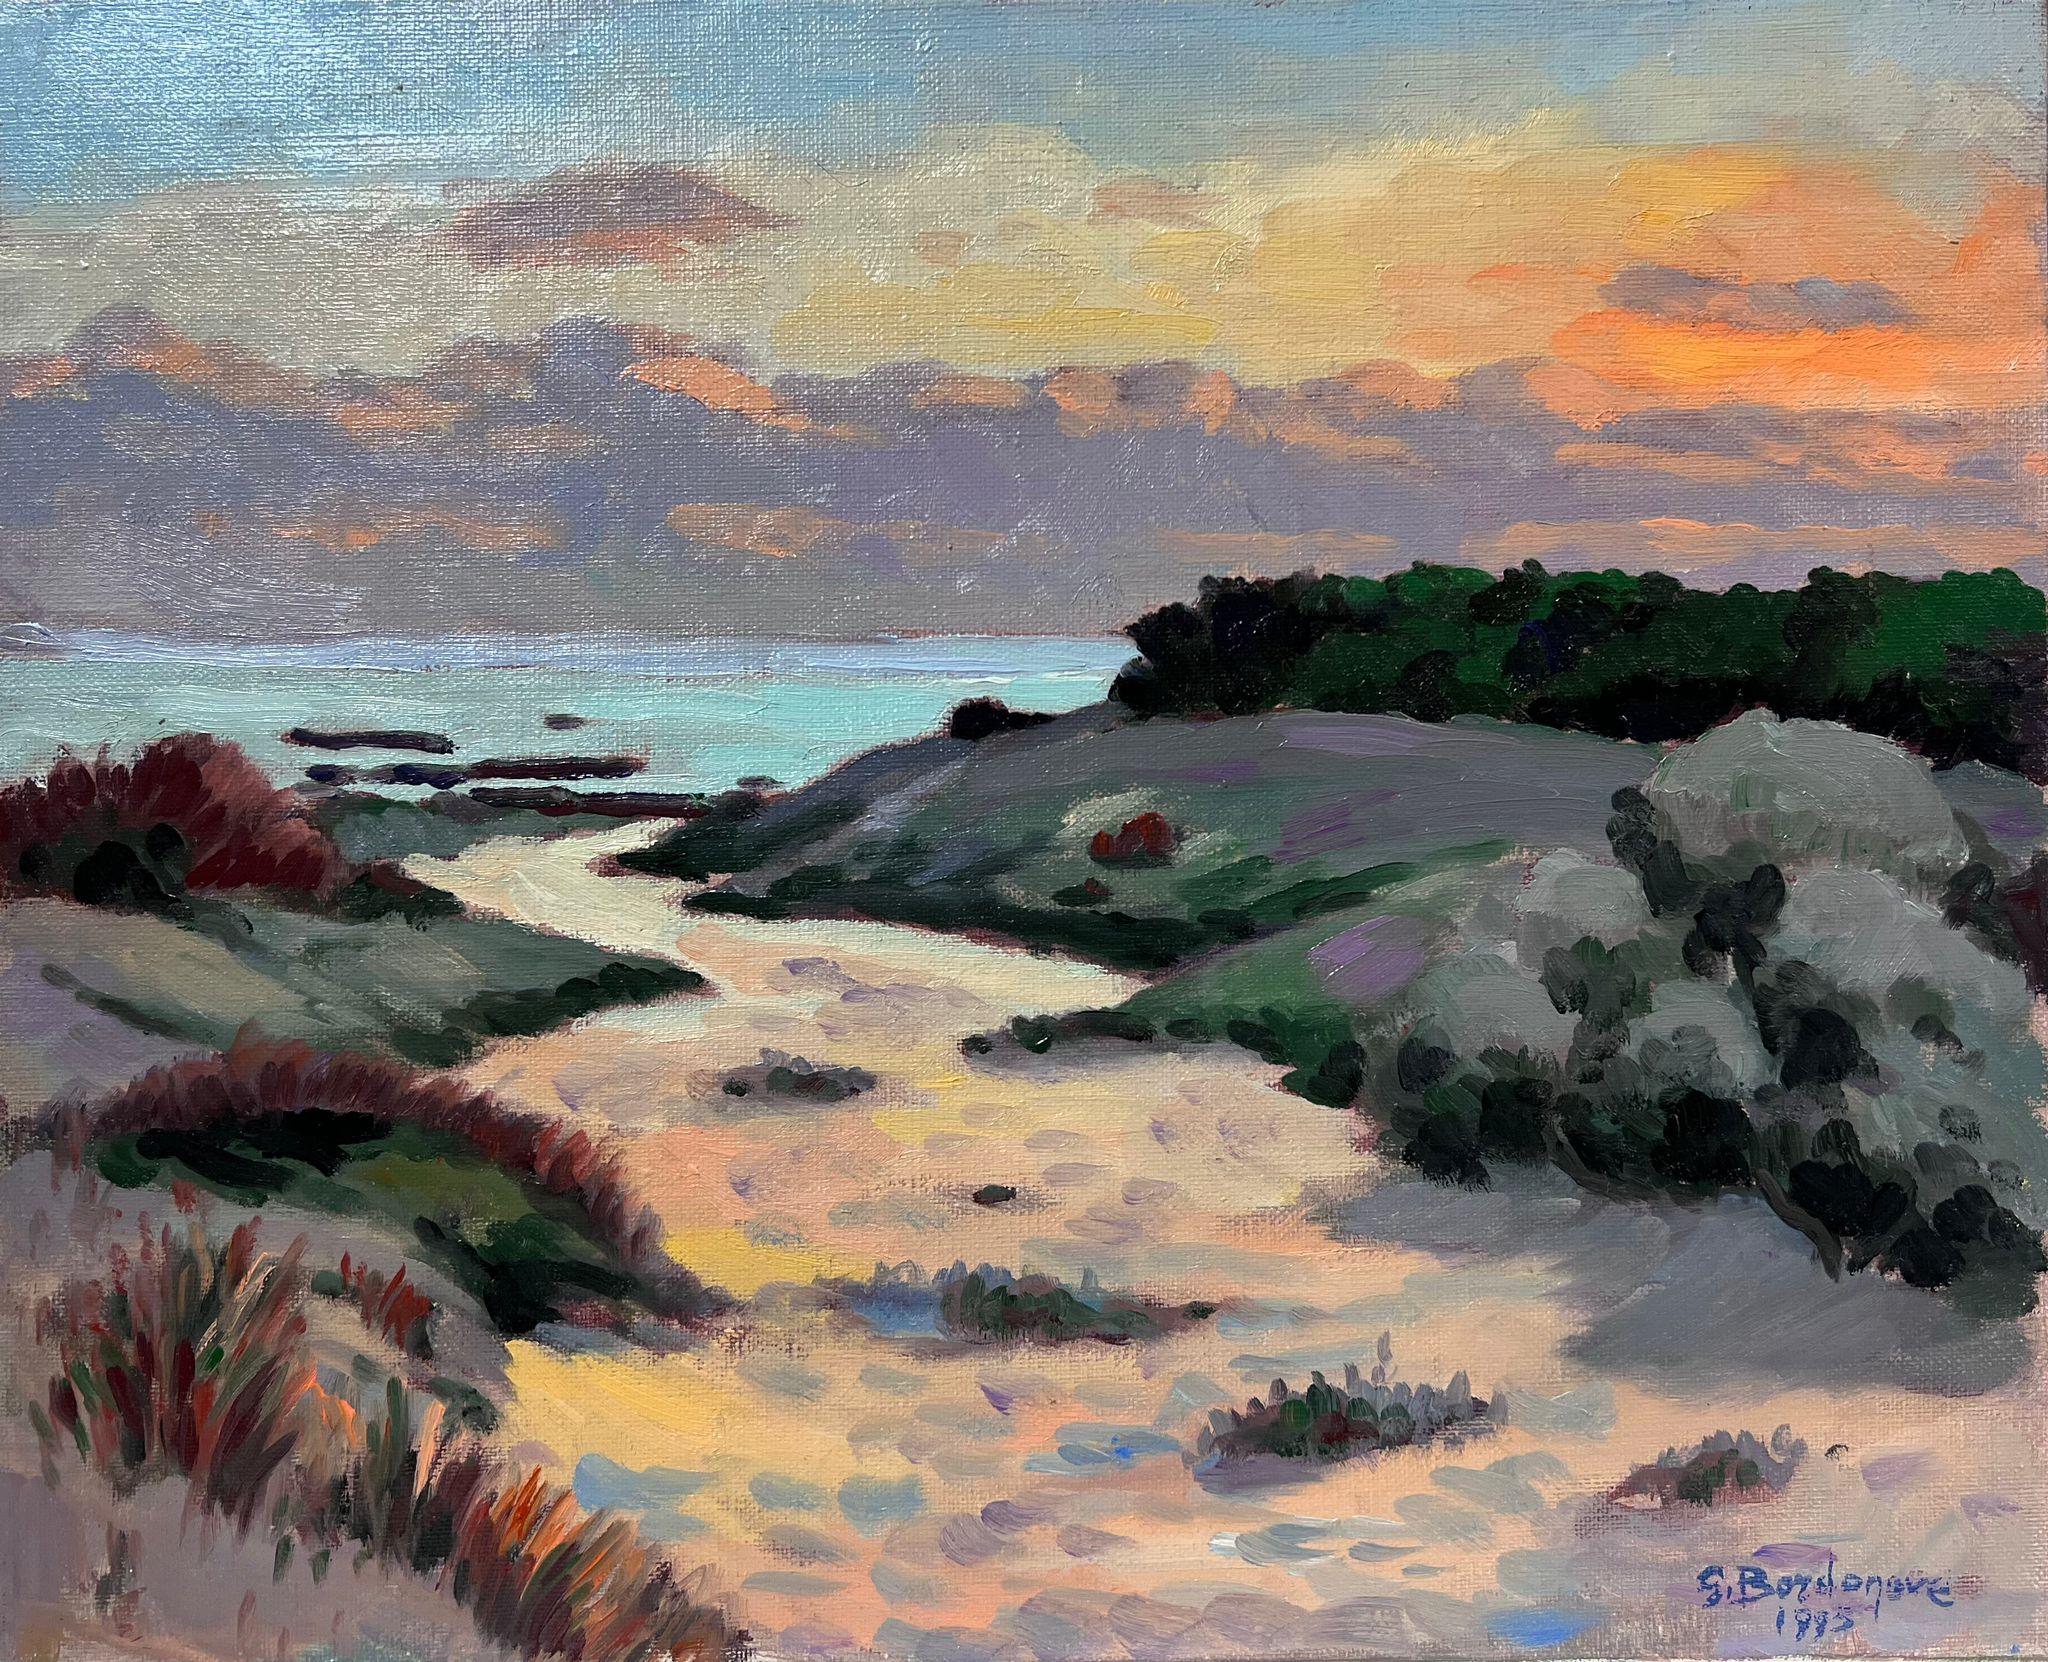 Contemporary French Impressionist Oil Sunset over Sea Sand Dunes Beach Pathway